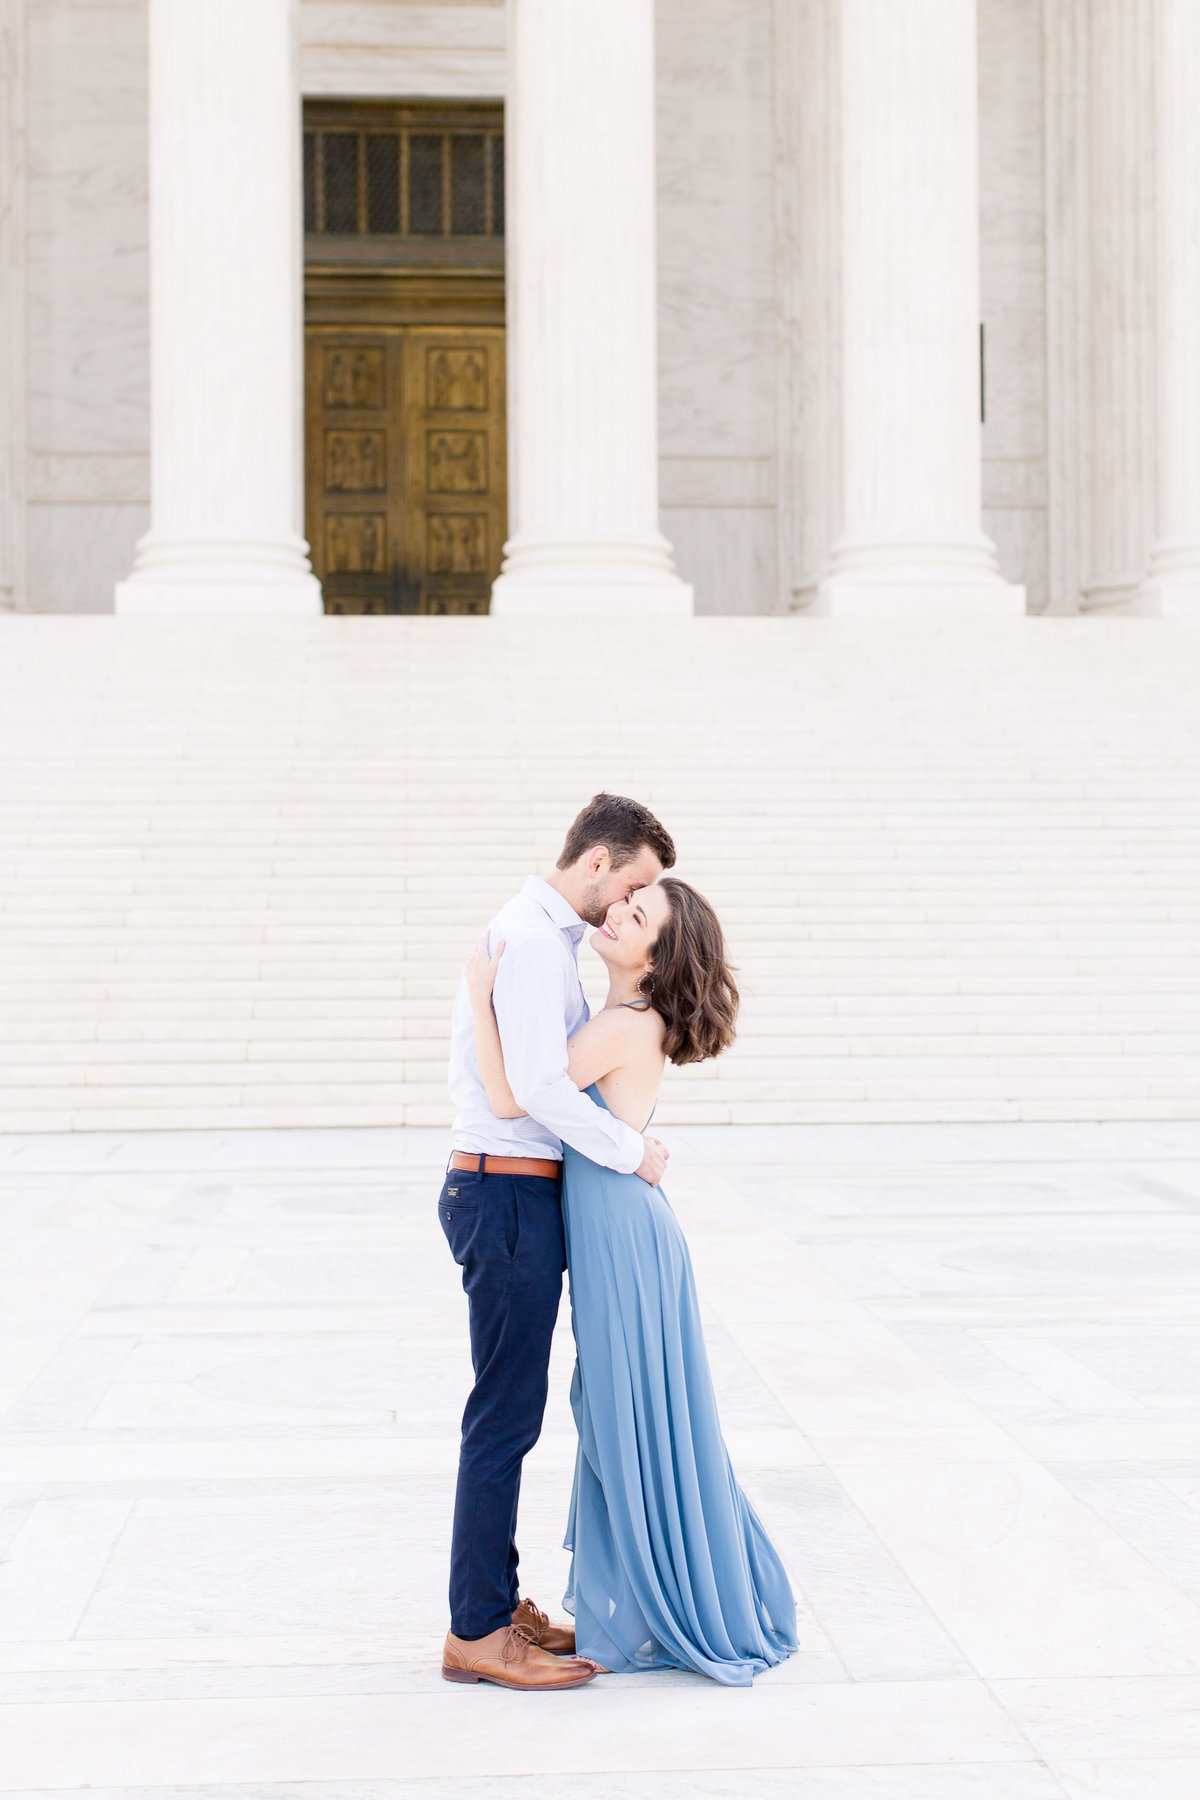 Capitol Building Engagement Session in DC with a visit to Supreme Court Building and Library of Congress | DC Wedding Photographer | Taylor Rose Photography-18